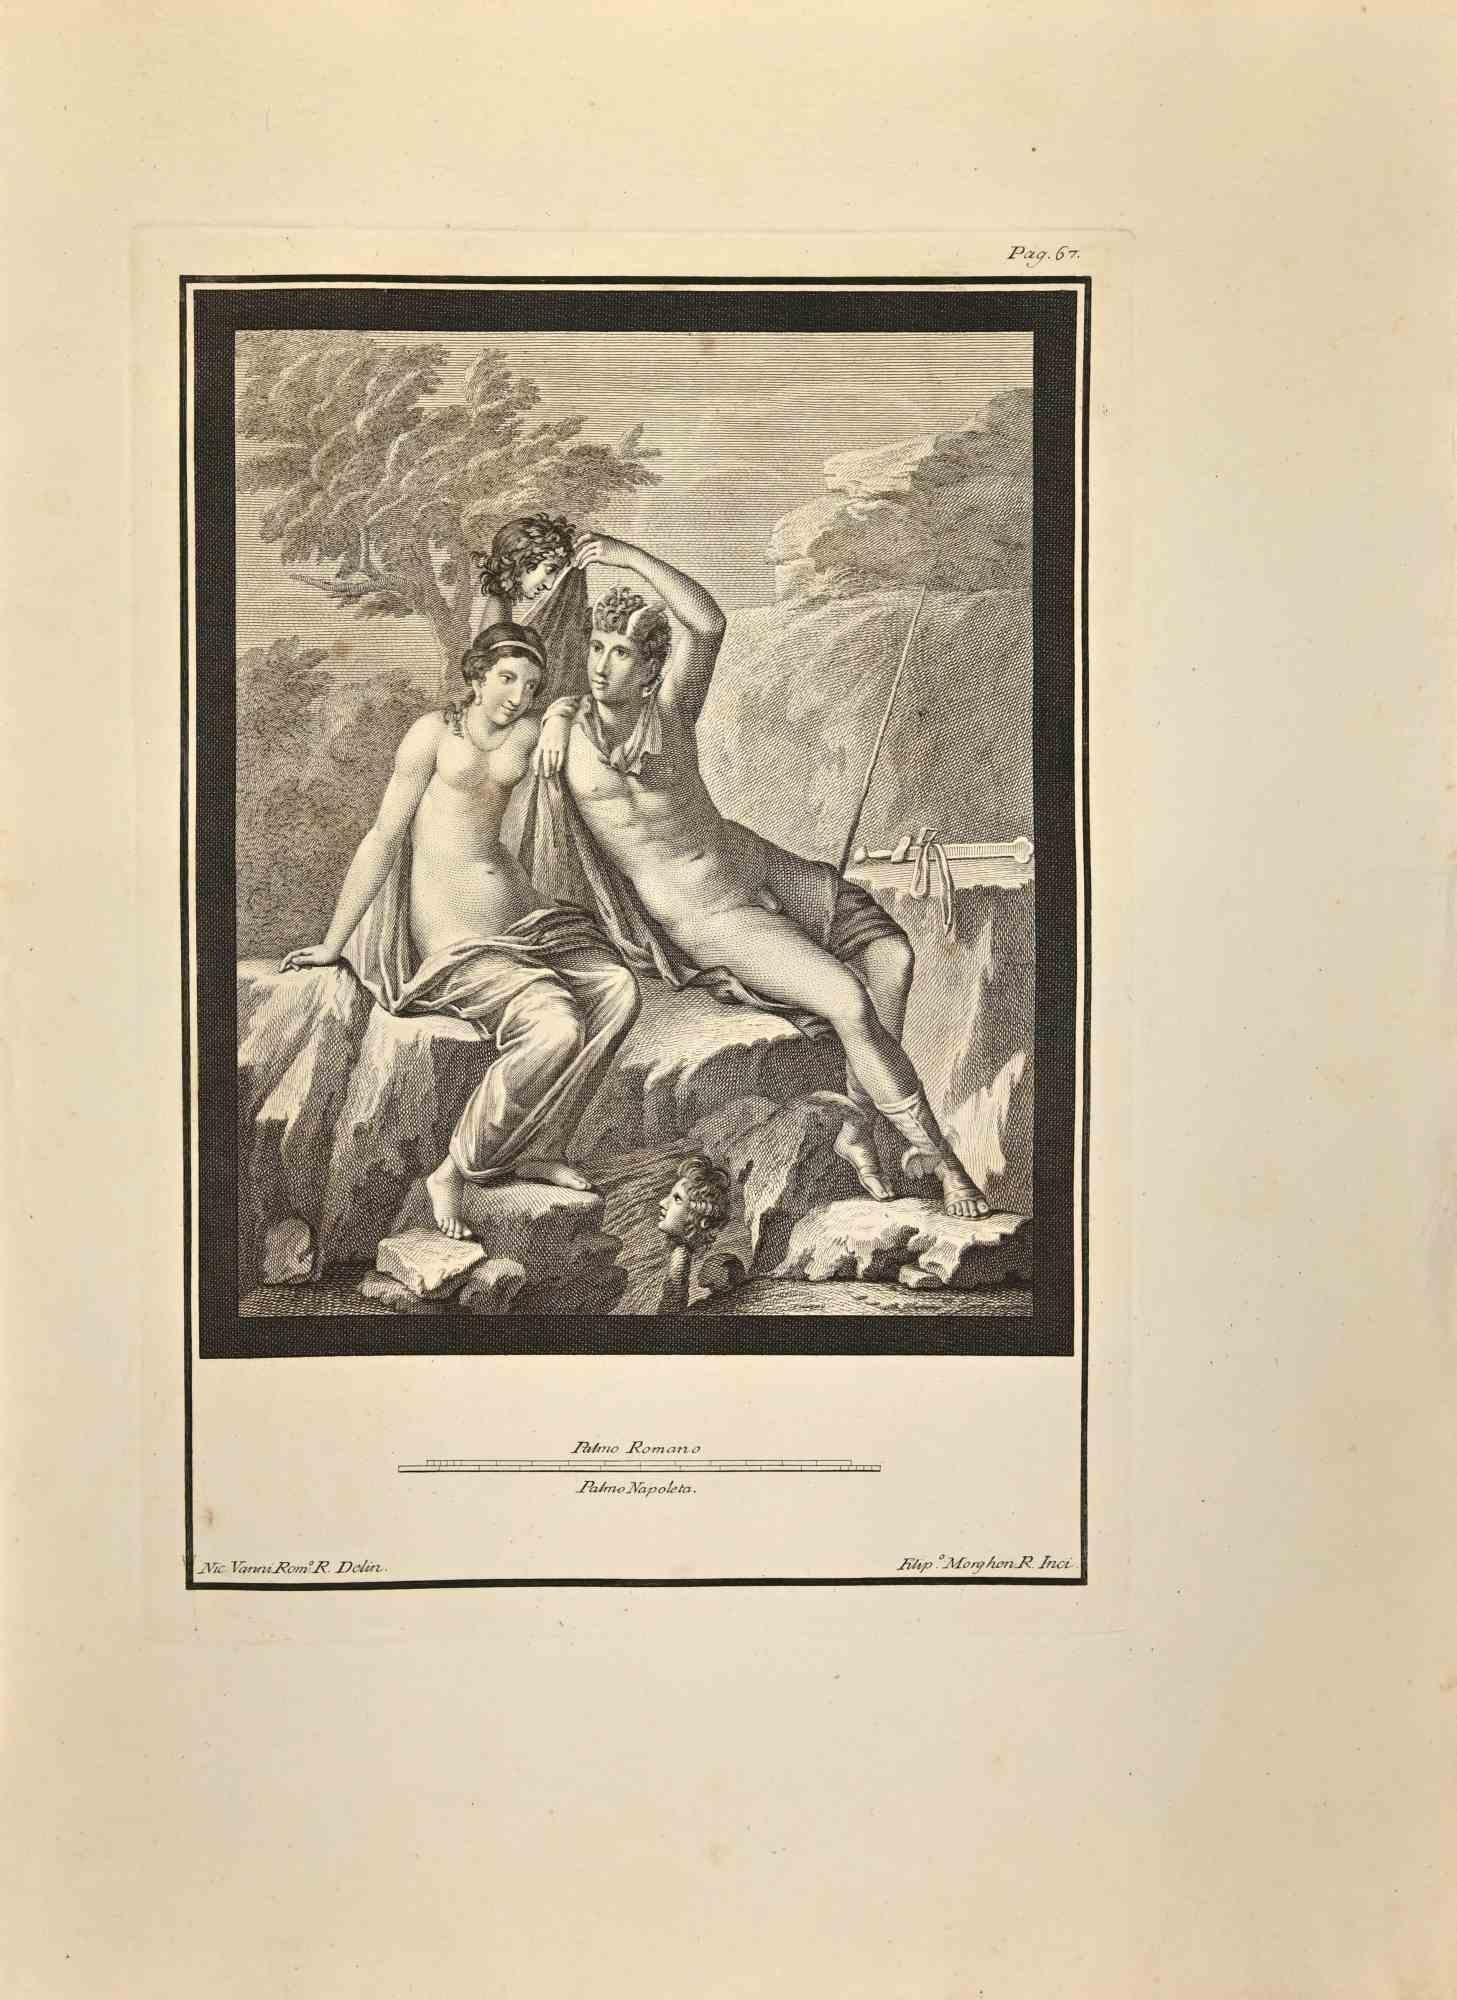 Hermes God And Nymph from "Antiquities of Herculaneum" is an etching on paper realized by Filippo Morghen in the 18th Century.

Signed on the plate.

Good conditions with some folding.

The etching belongs to the print suite “Antiquities of